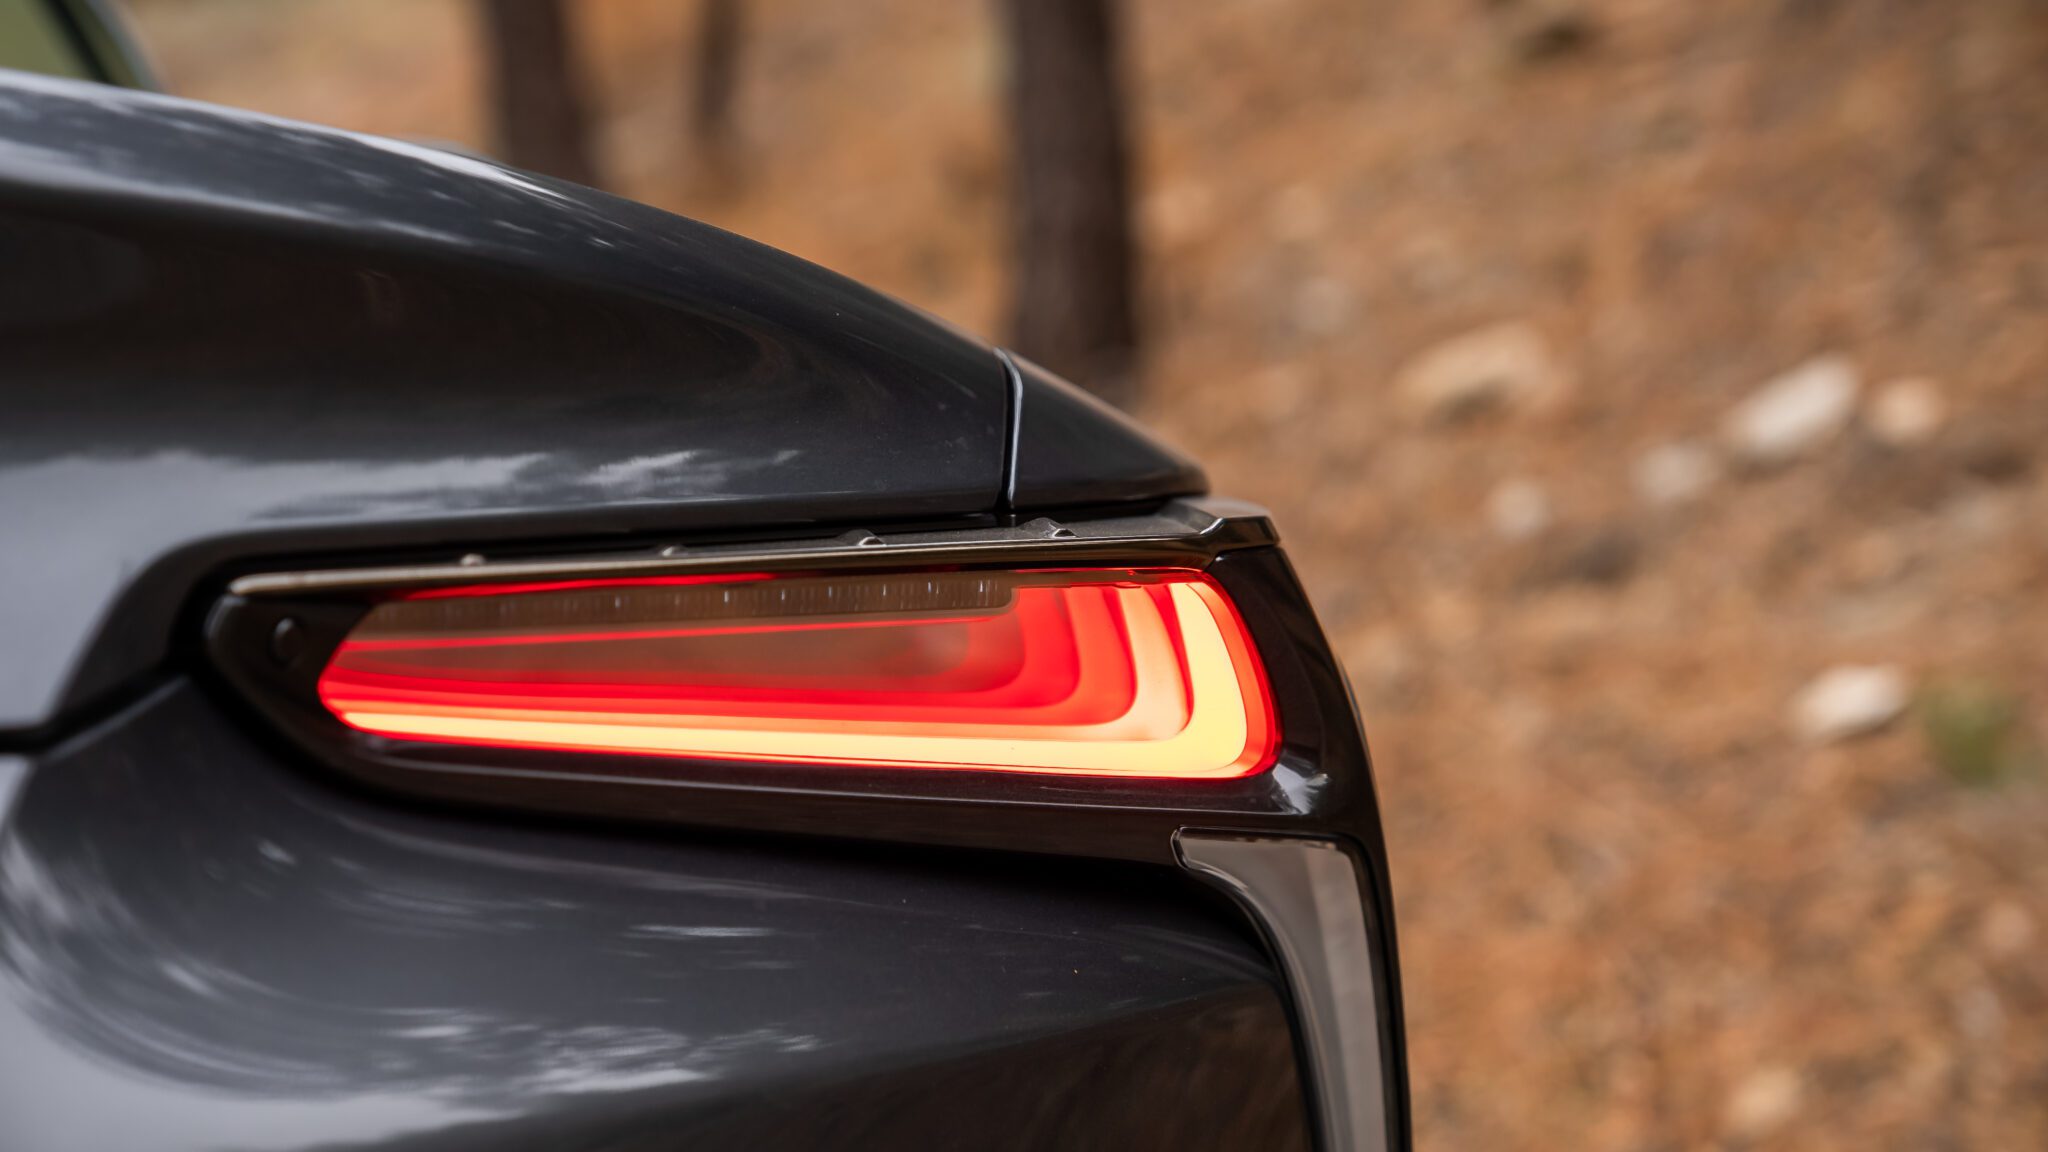 A close up photo of a car's tail light.